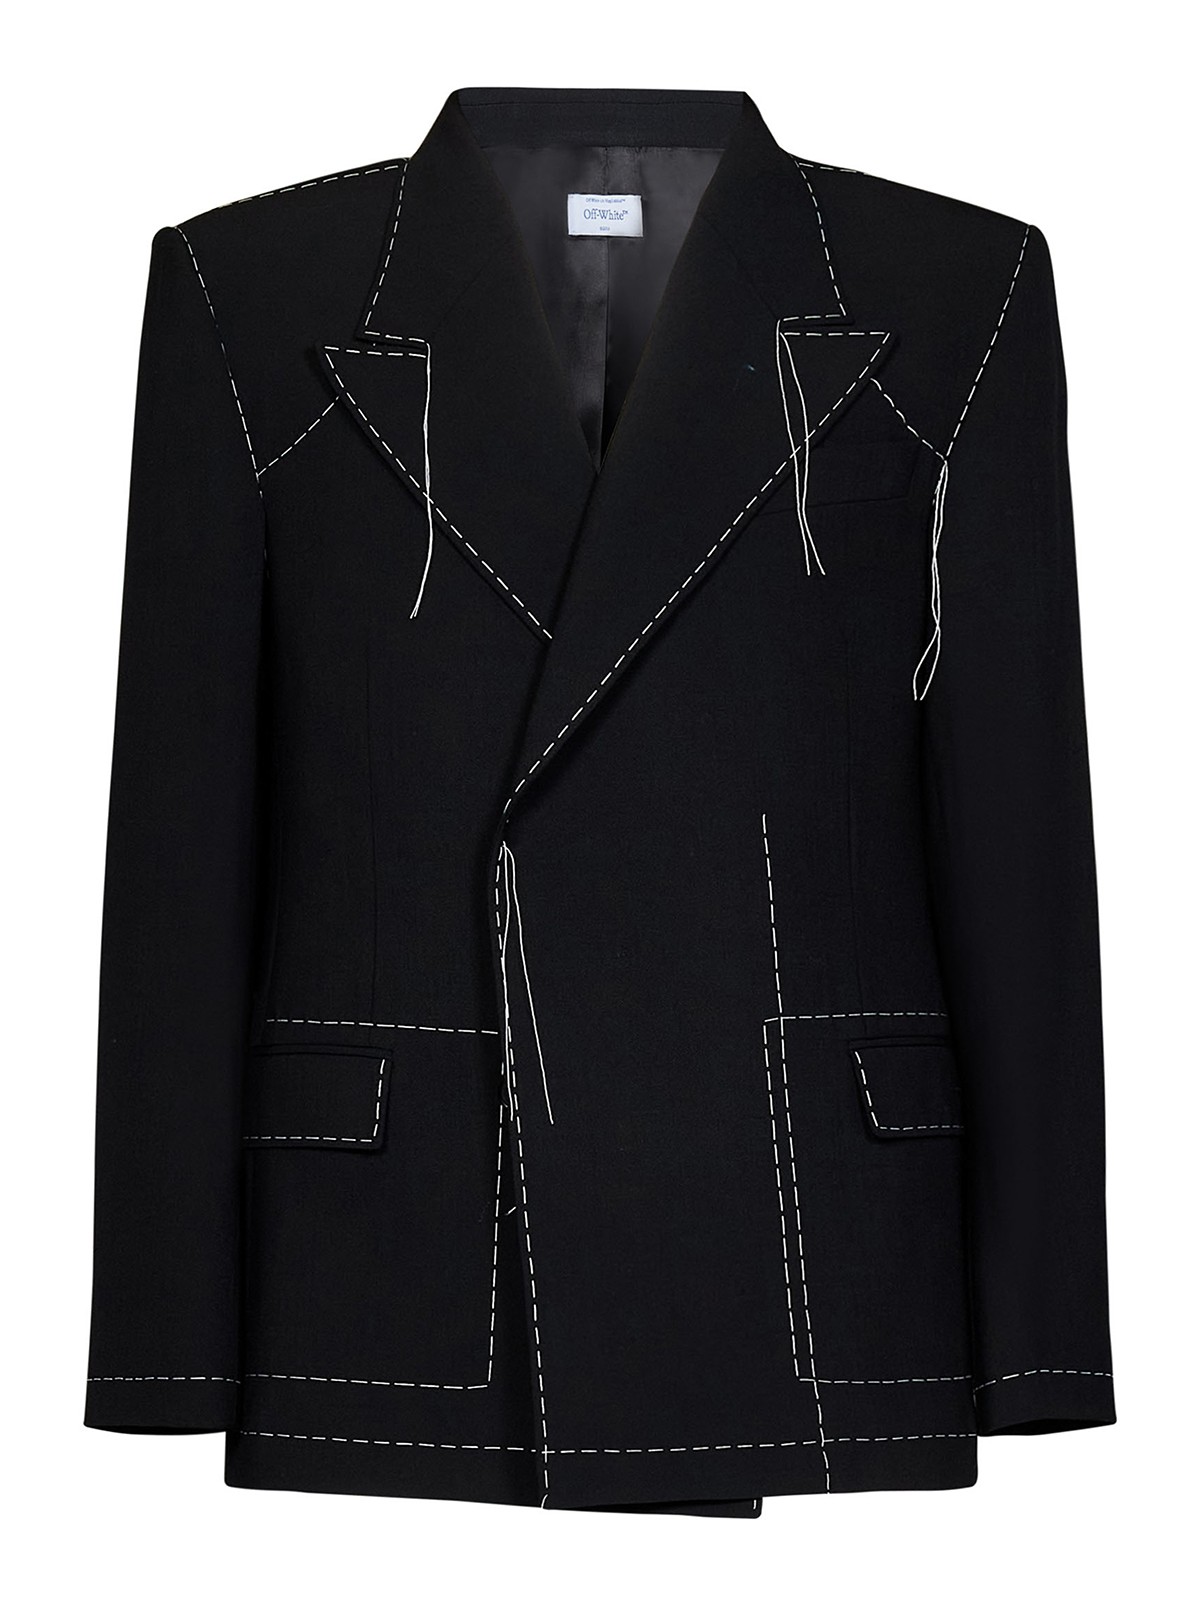 Off-white Black Double-breasted Blazer In Wool Blend